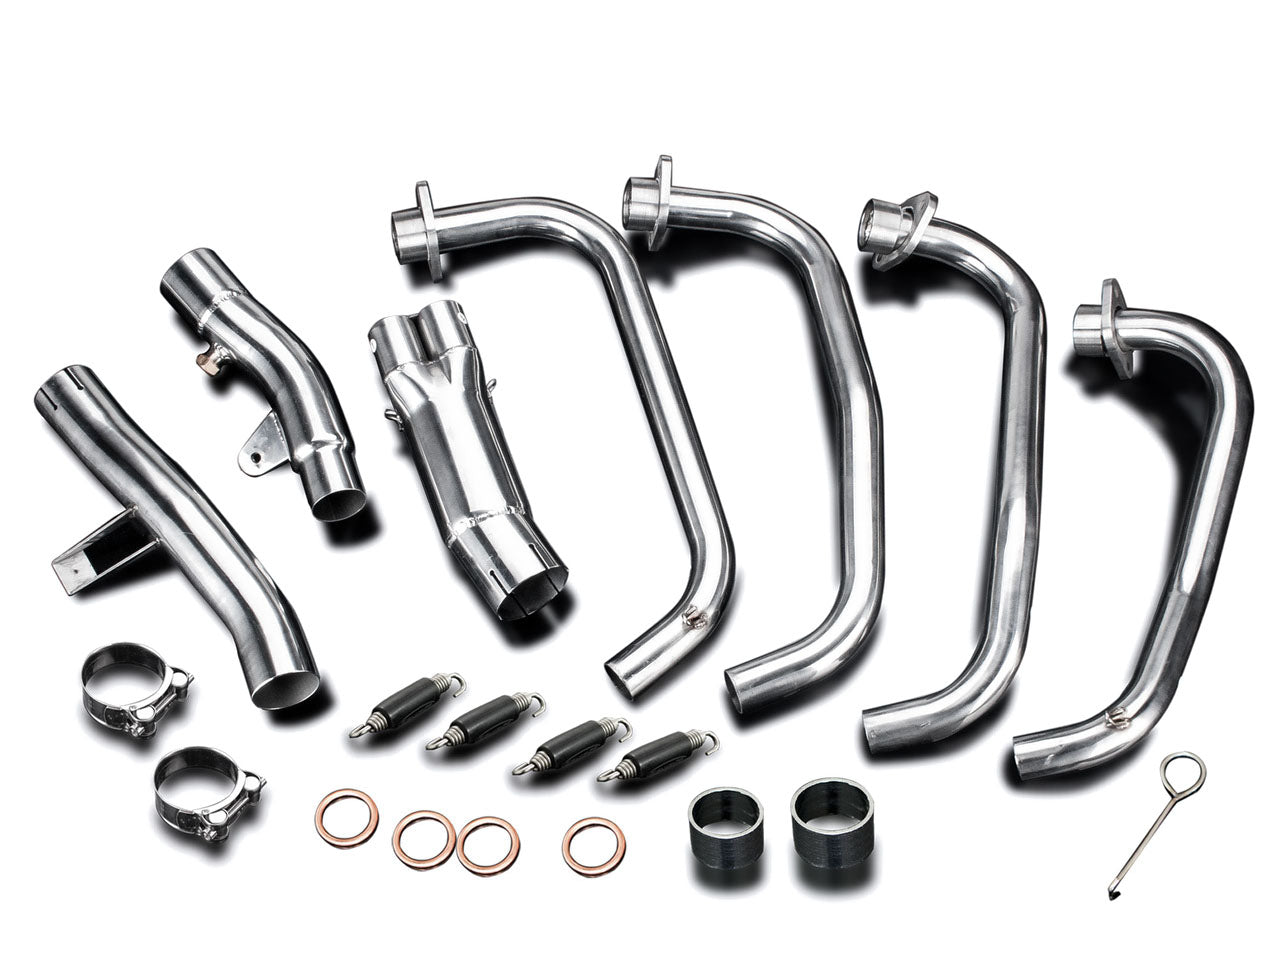 DELKEVIC Honda CB1100 Full Exhaust System with 13" Tri-Oval Silencer